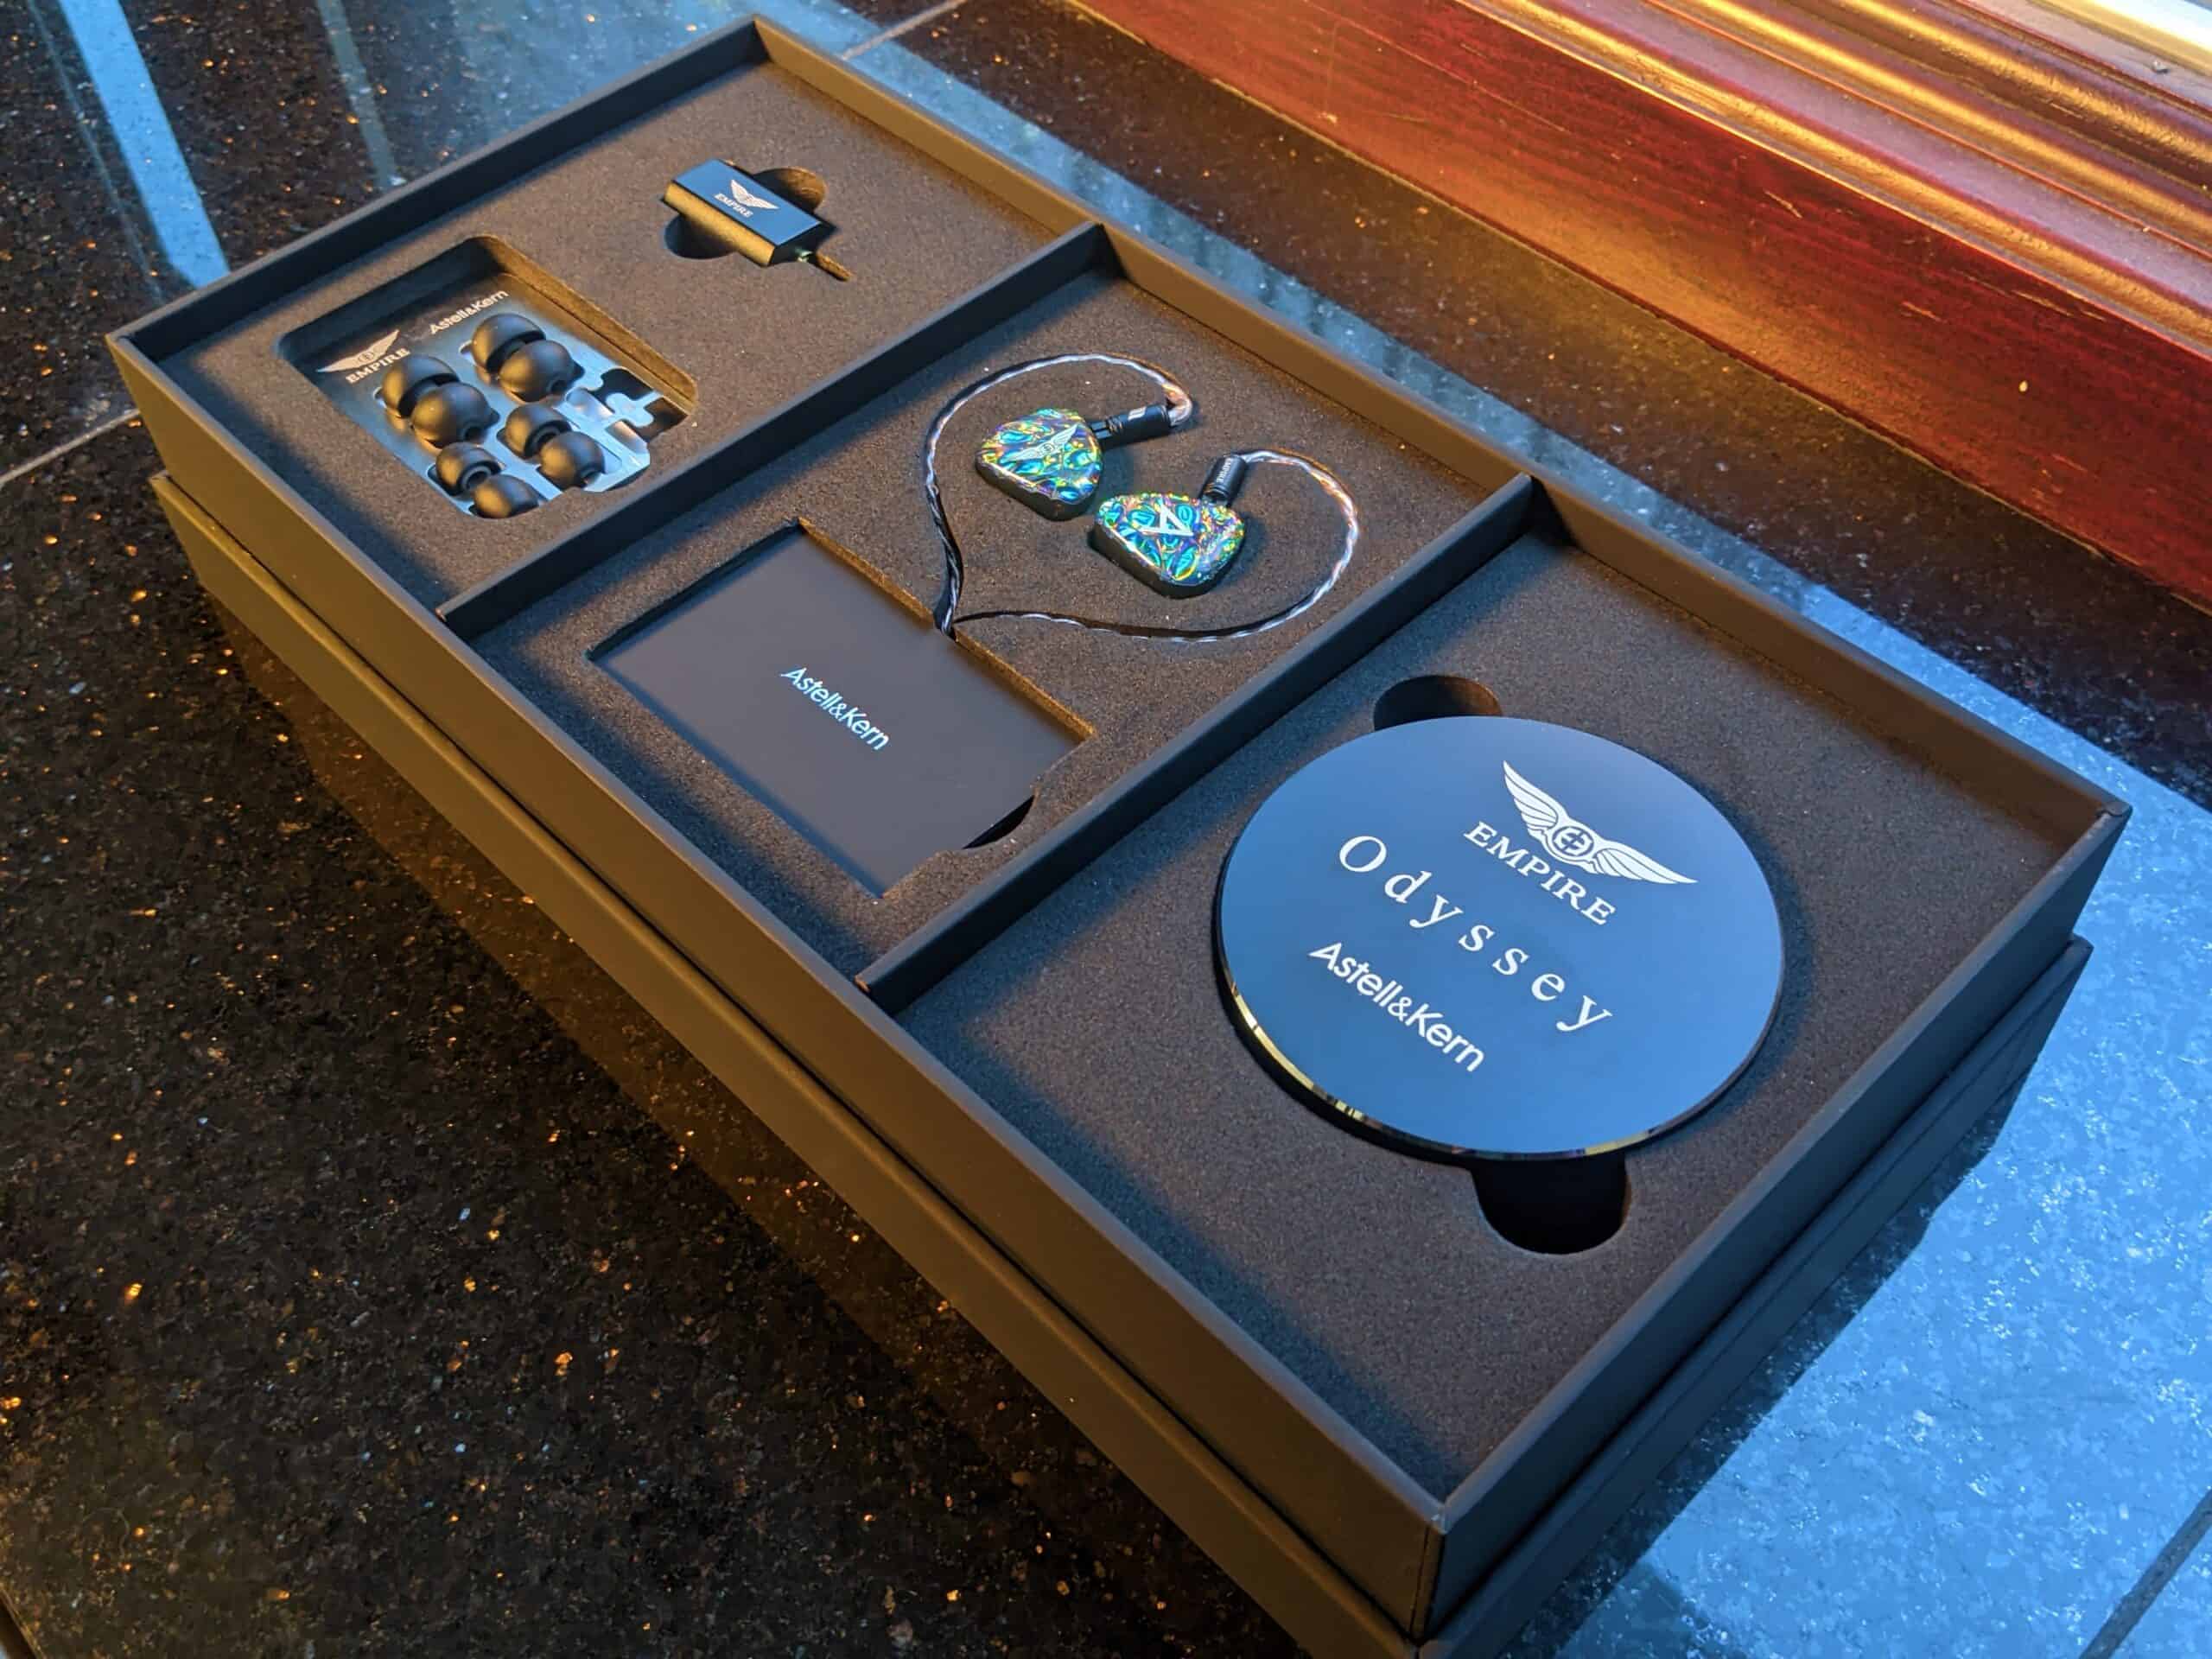 Empire Ears, Astell&Kern, Odyssey, IEM, in-ear monitor, collaboration, review